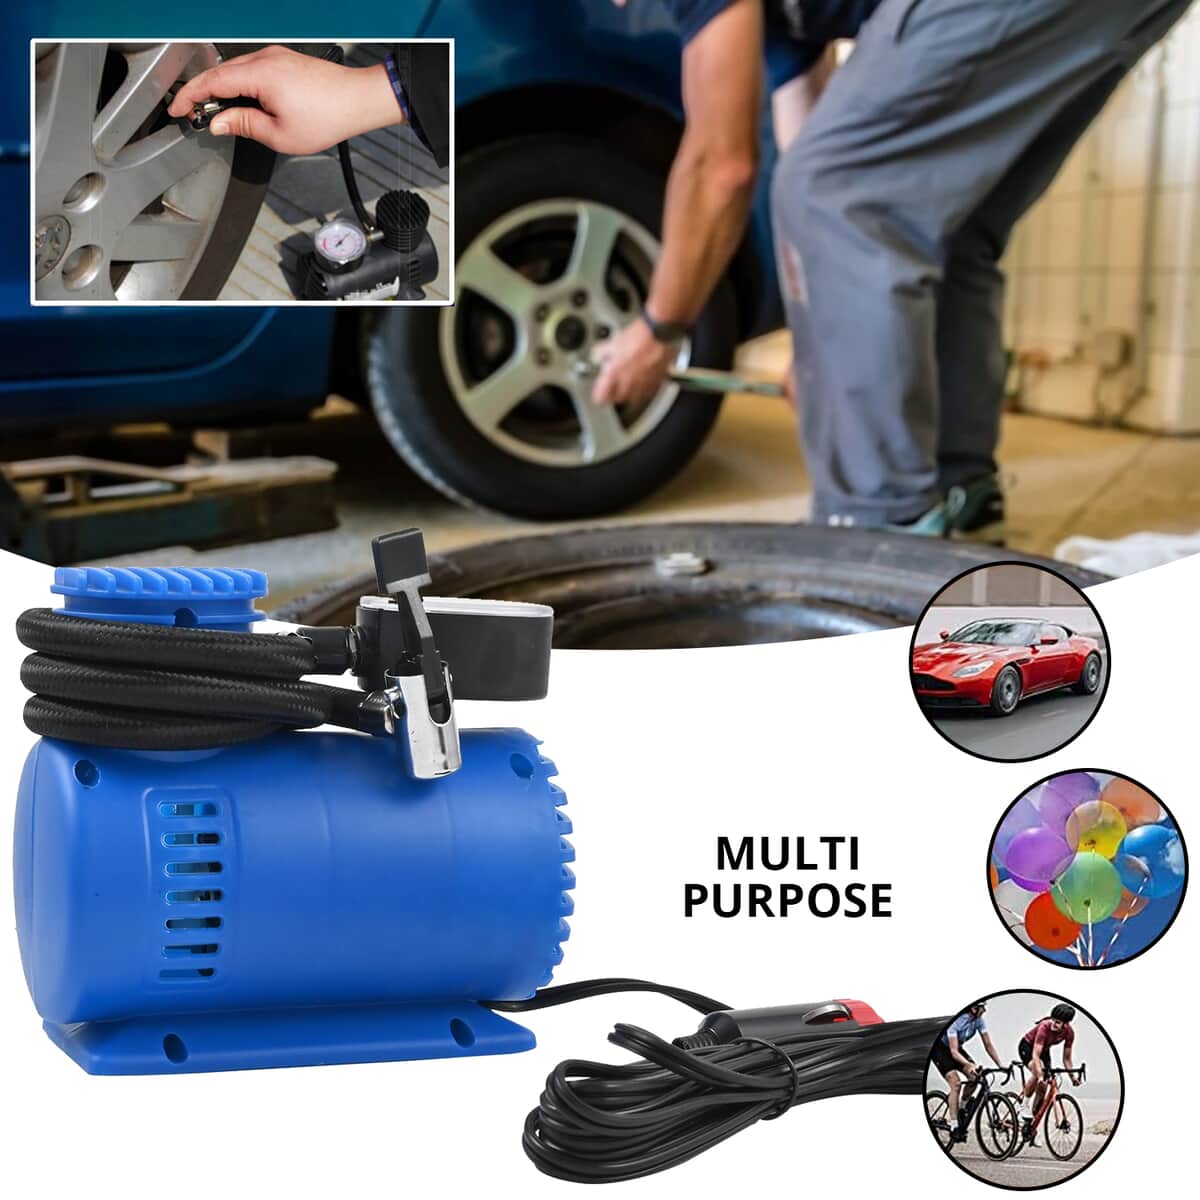 AUTO EFFECTS Blue Portable Mini Air Compressor for Tire Inflation, 12Volt DC Powered, Built-in Pressure Gauge, Inflates Automobile tires, Bike tires image number 1